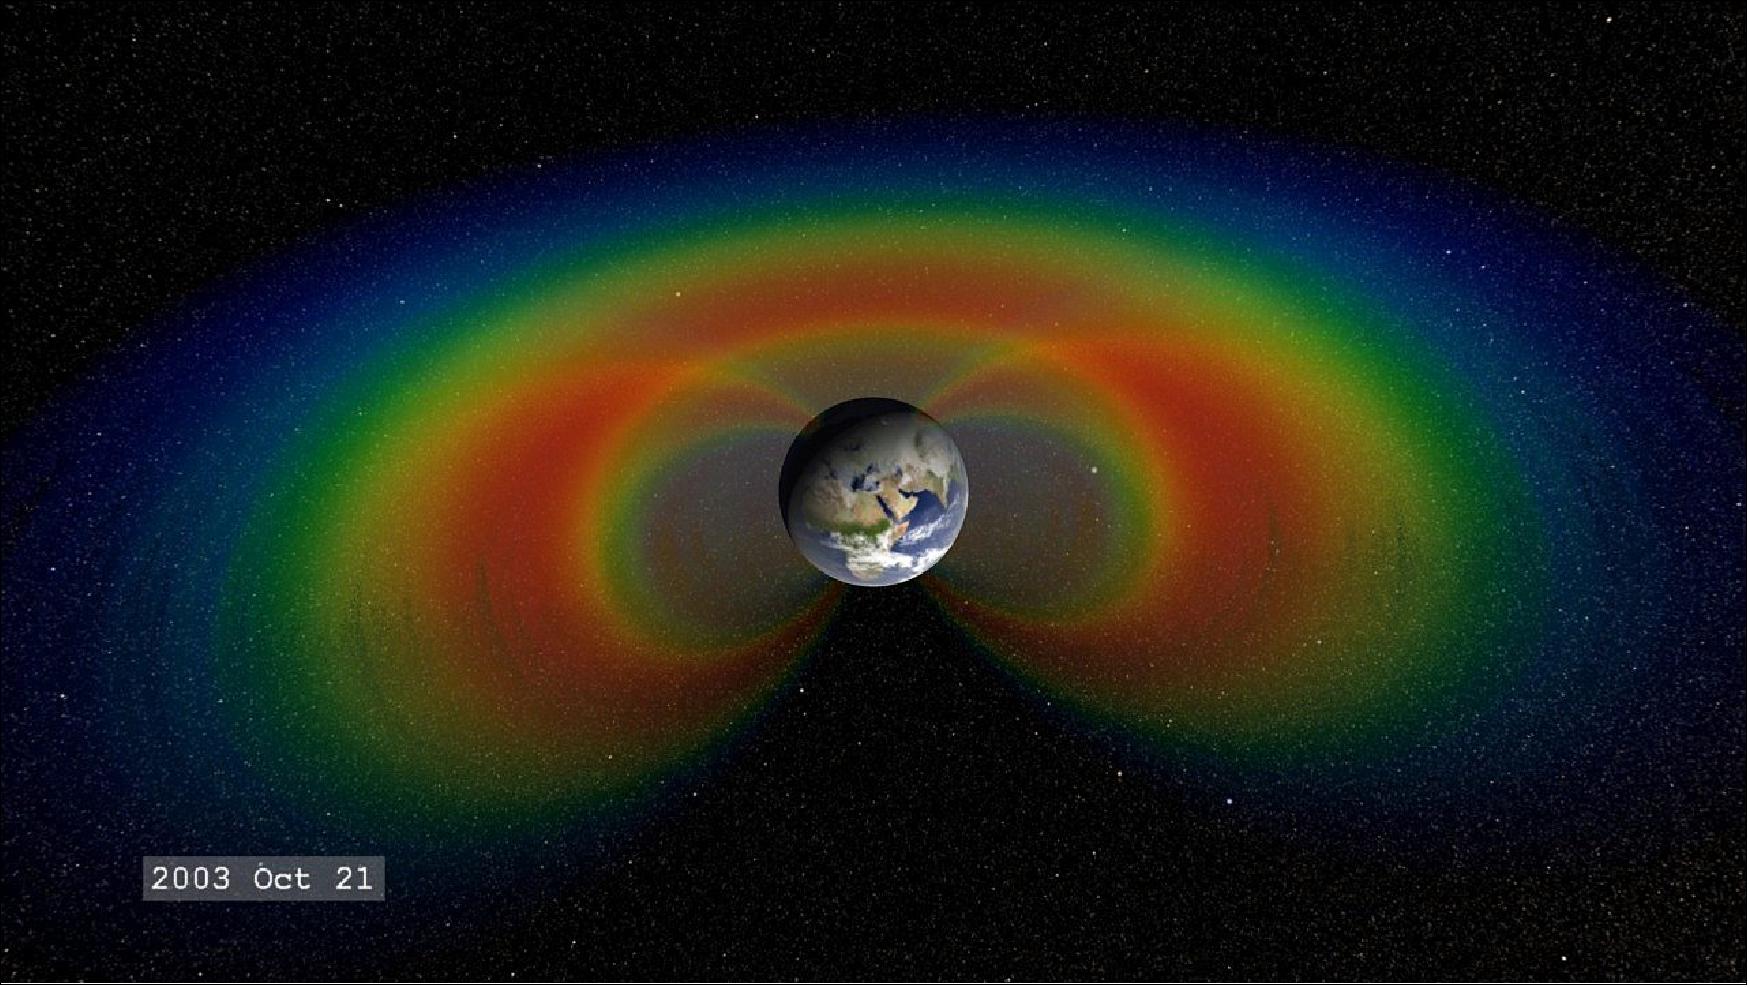 Figure 17: The Radiation Belts as seen by SAMPEX. When solar material streams strikes Earth's magnetosphere, it can become trapped and held in two donut-shaped belts around the planet called the Van Allen Belts. The belts restrain the particles to travel along Earth's magnetic field lines, continually bouncing back and forth from pole to pole (image credit: NASA Goddard / Tom Bridgman)